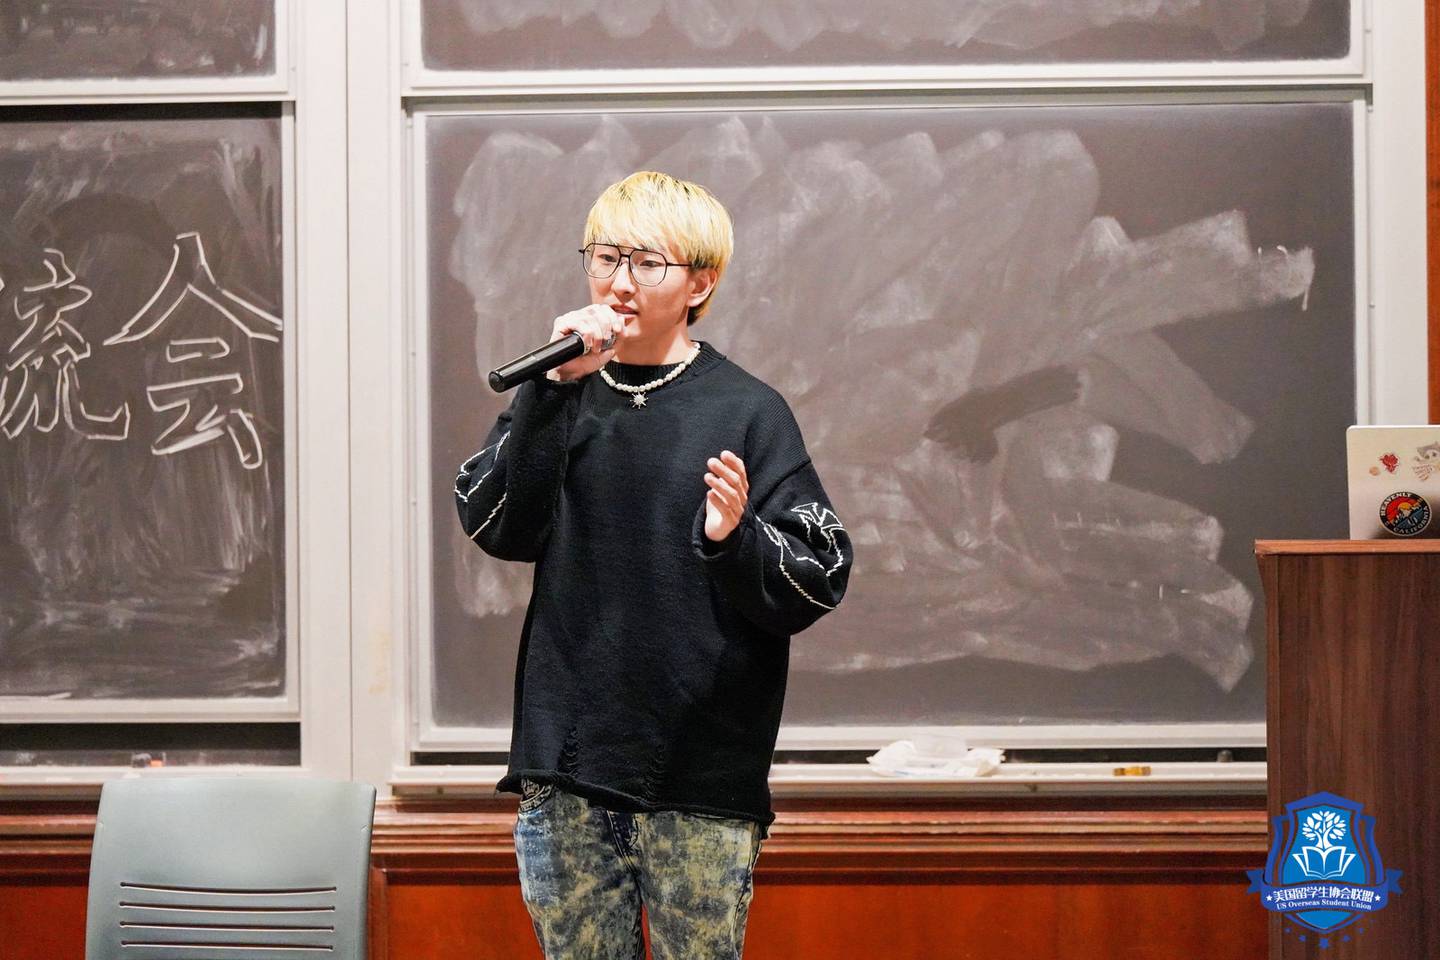 Photo of a person holding a microphone in front of a blackboard